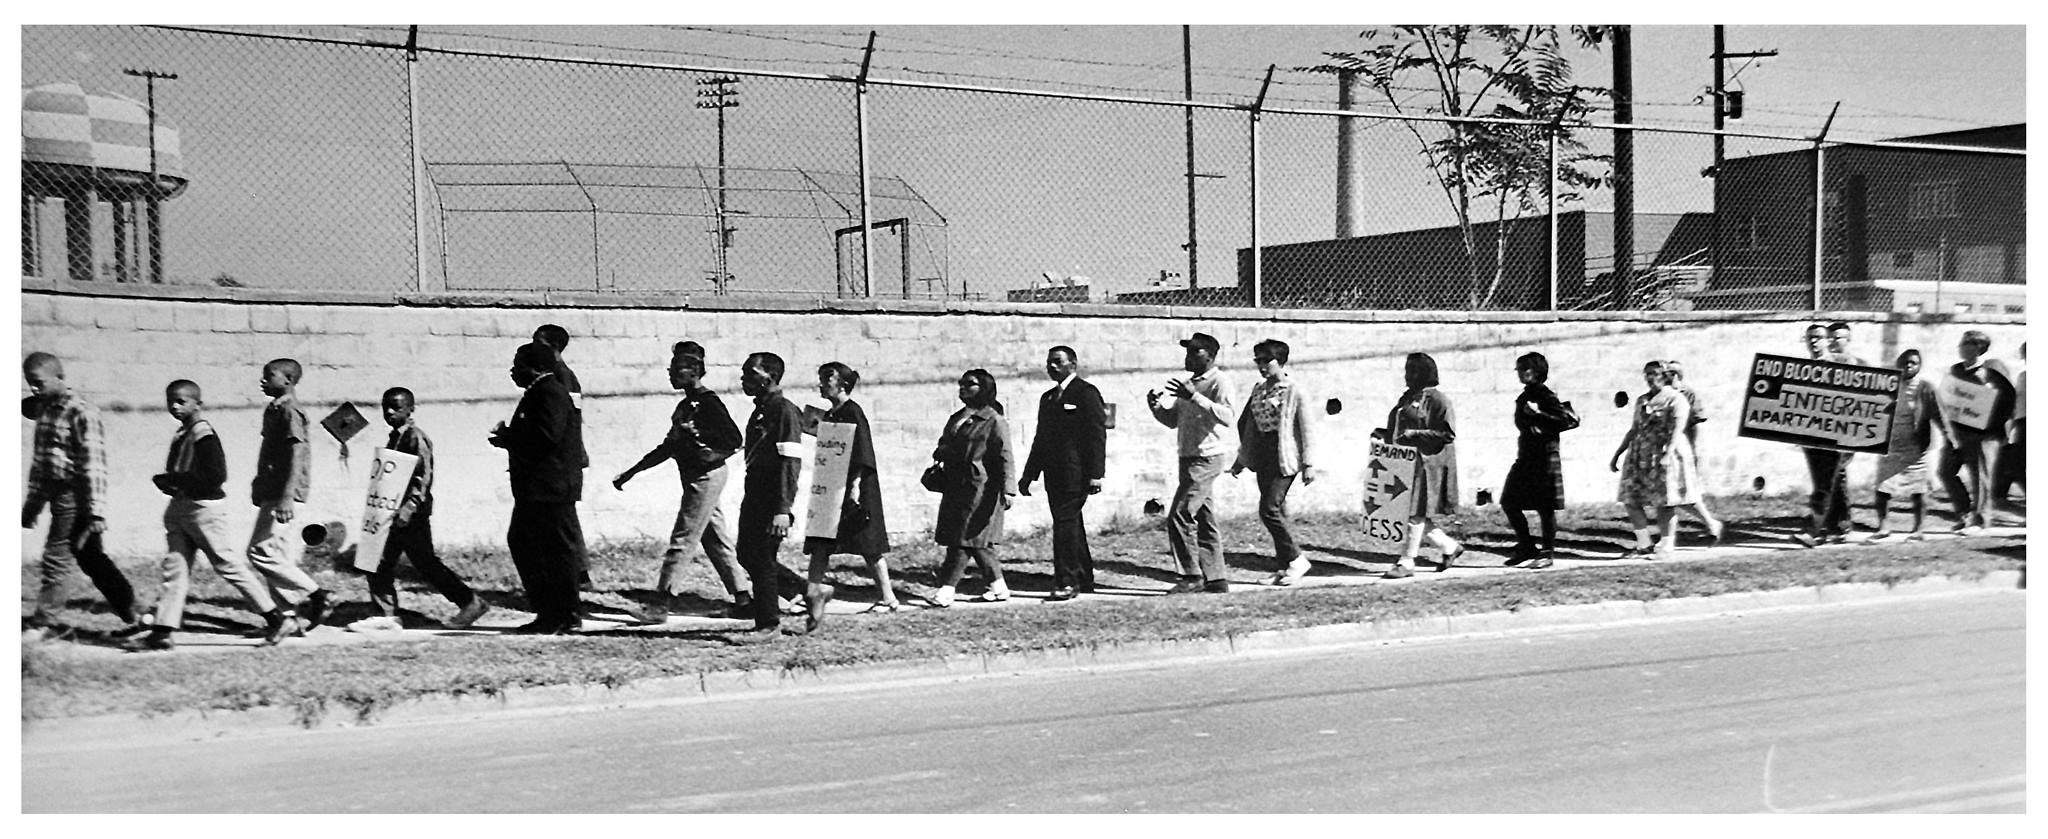 Advocates for open housing in Northern Virginia march through Alexandria on October 8, 1966, the first day of a three-day, 14-mile trek. DC Public Library, Star Collection © Washington Post.